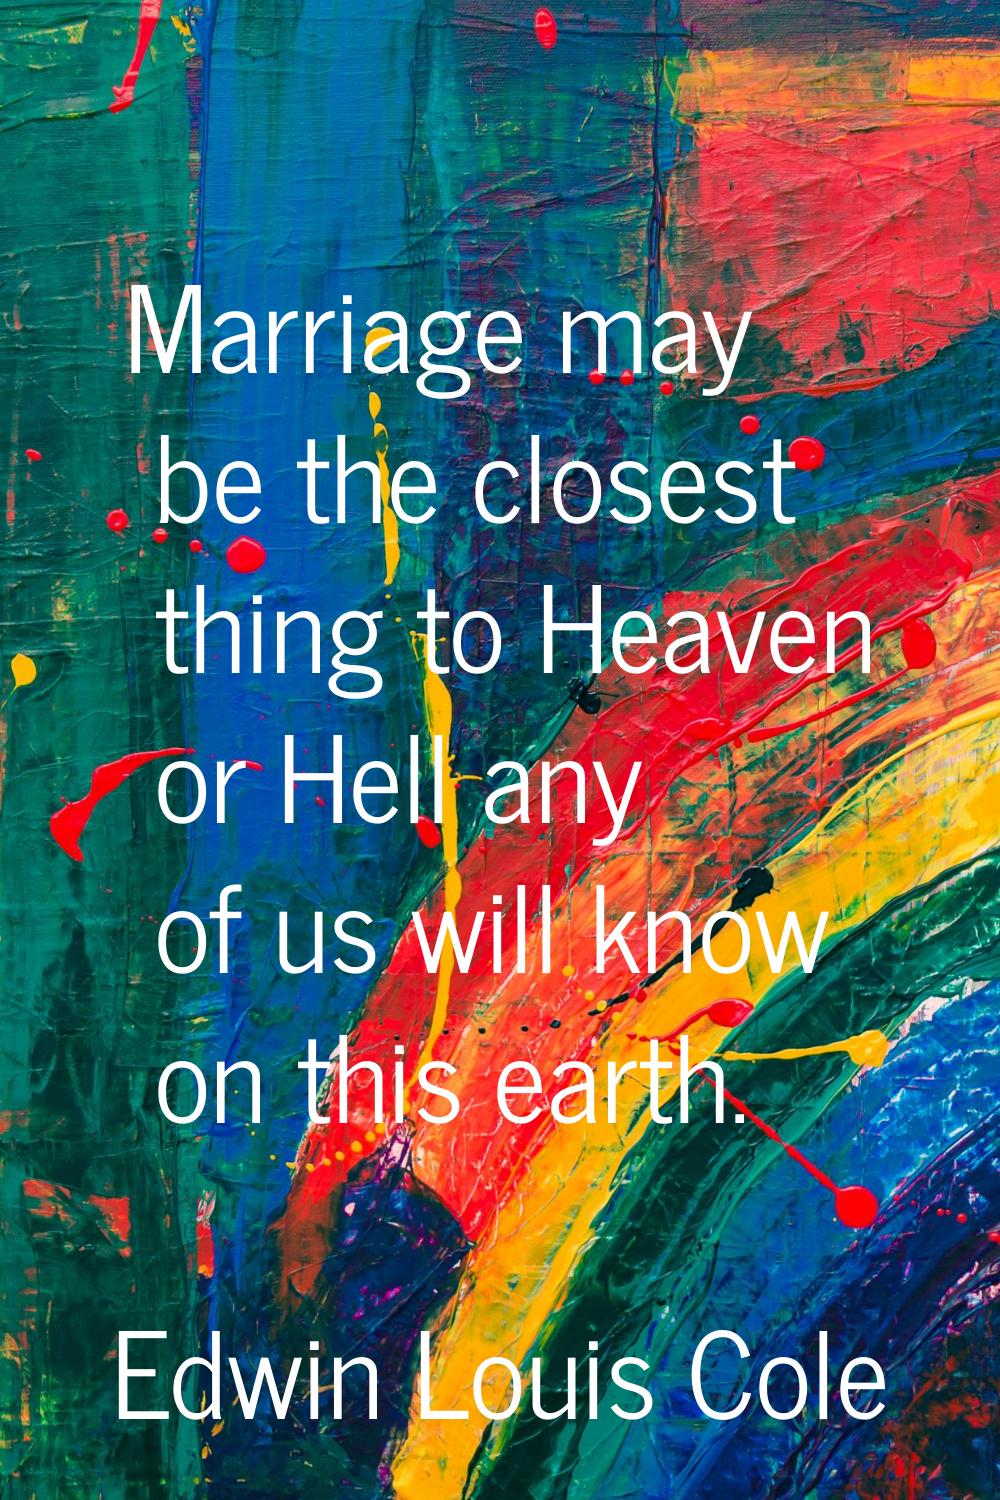 Marriage may be the closest thing to Heaven or Hell any of us will know on this earth.